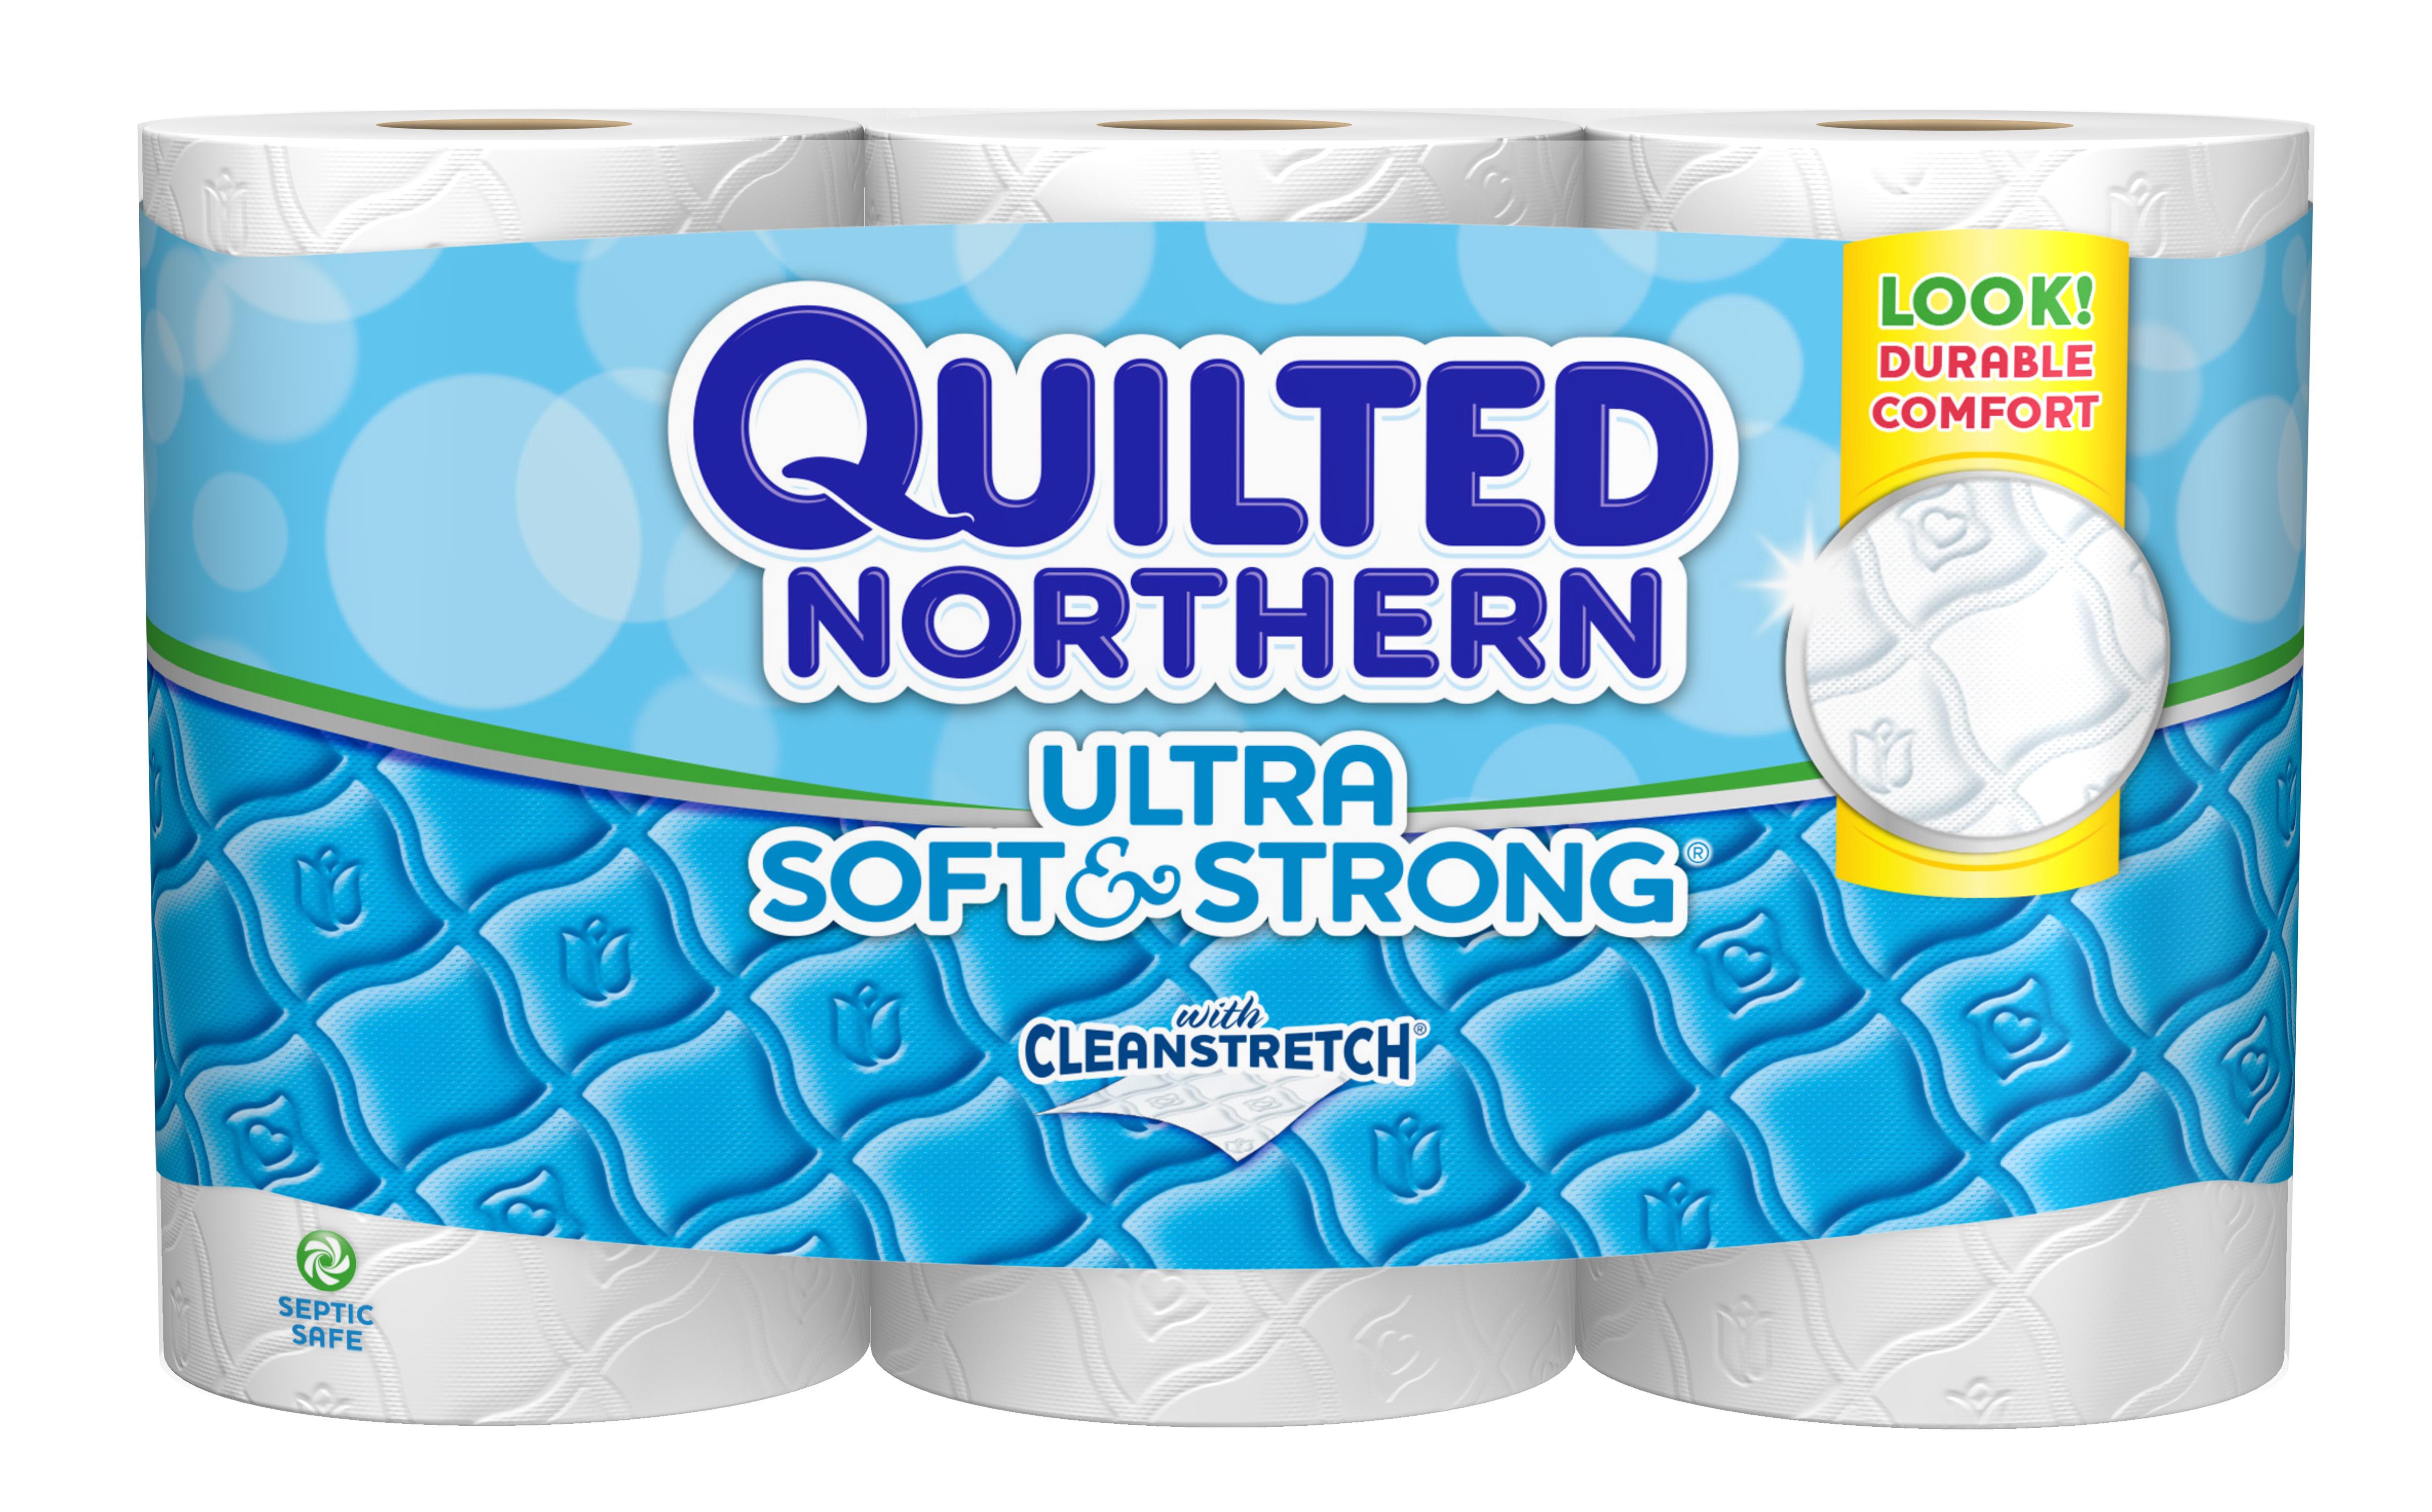 Save $1 on Quilted Northern Ultra Soft & Strong Mega Rolls!